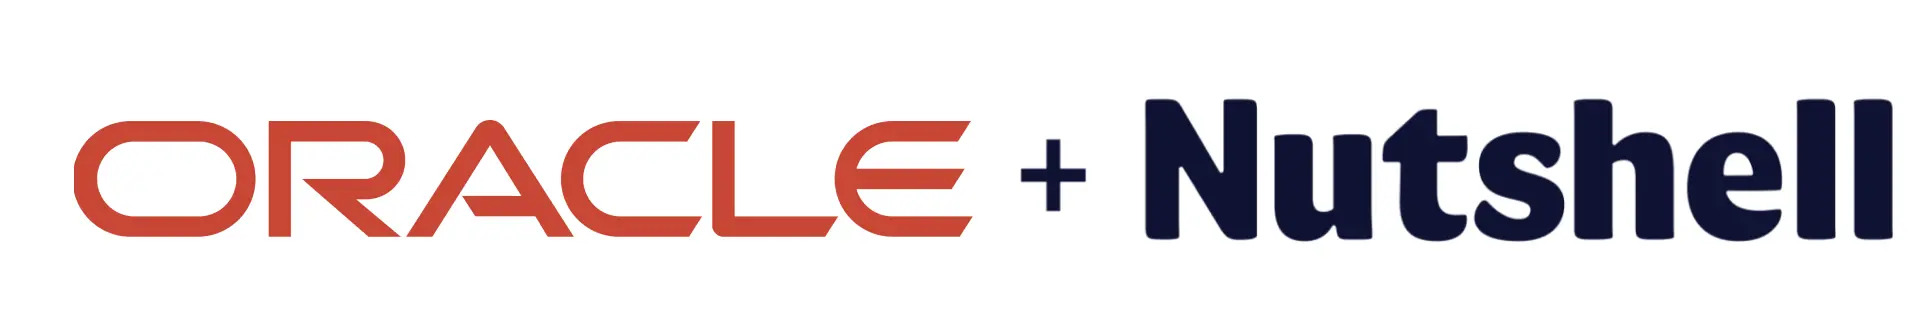 Oracle and Nutshell logos integration graphic